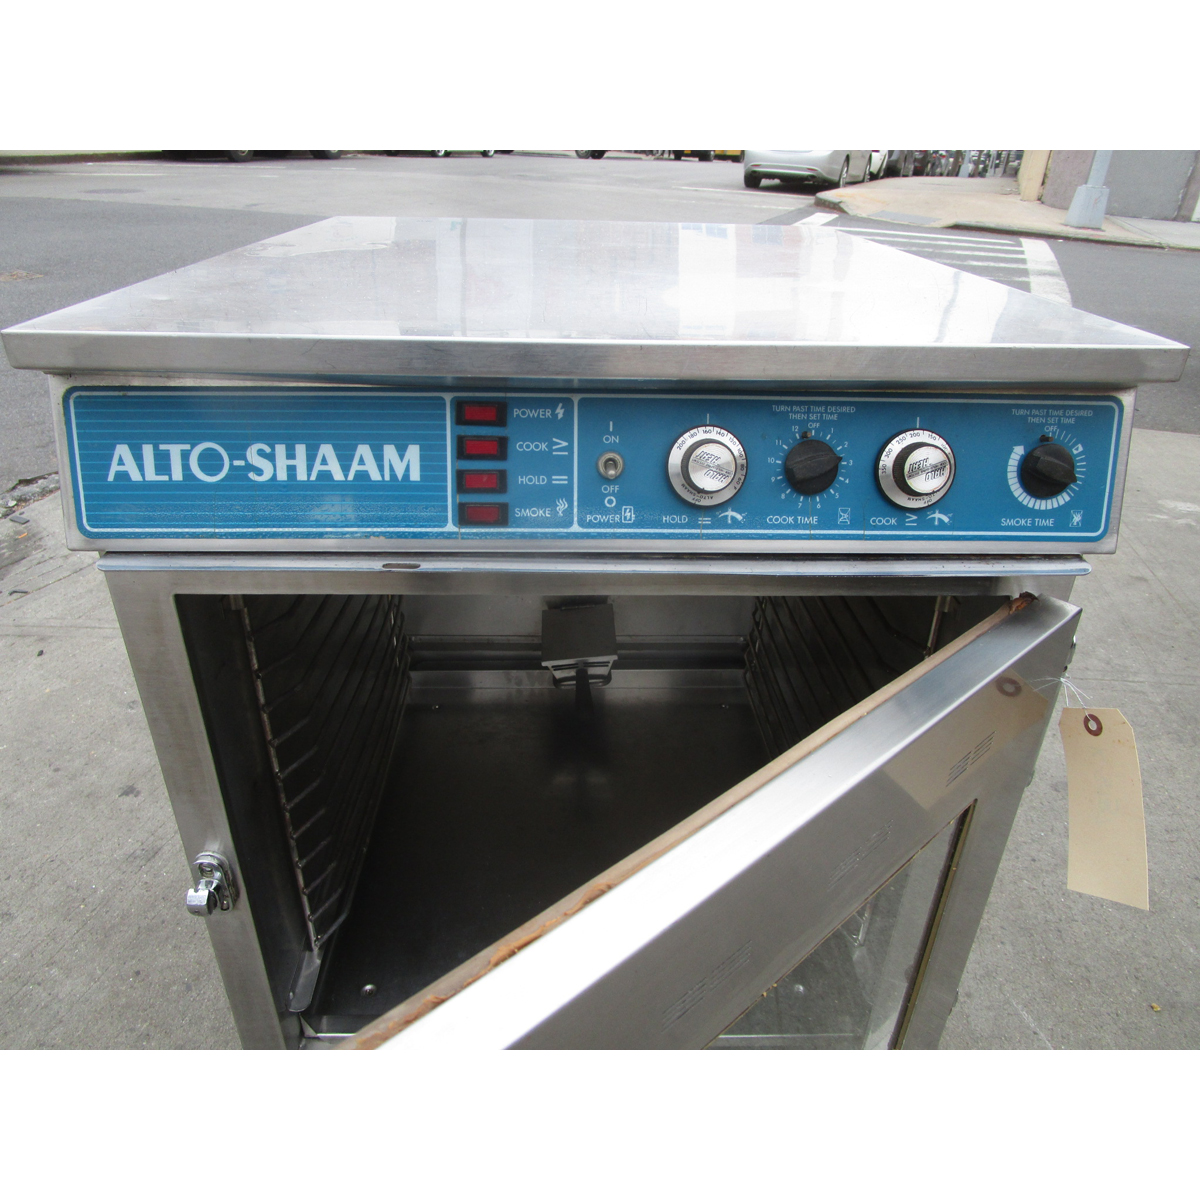 Alto Shaam 767-SK Cooking, Holding & Smoking Oven, Used Excellent Condition image 2